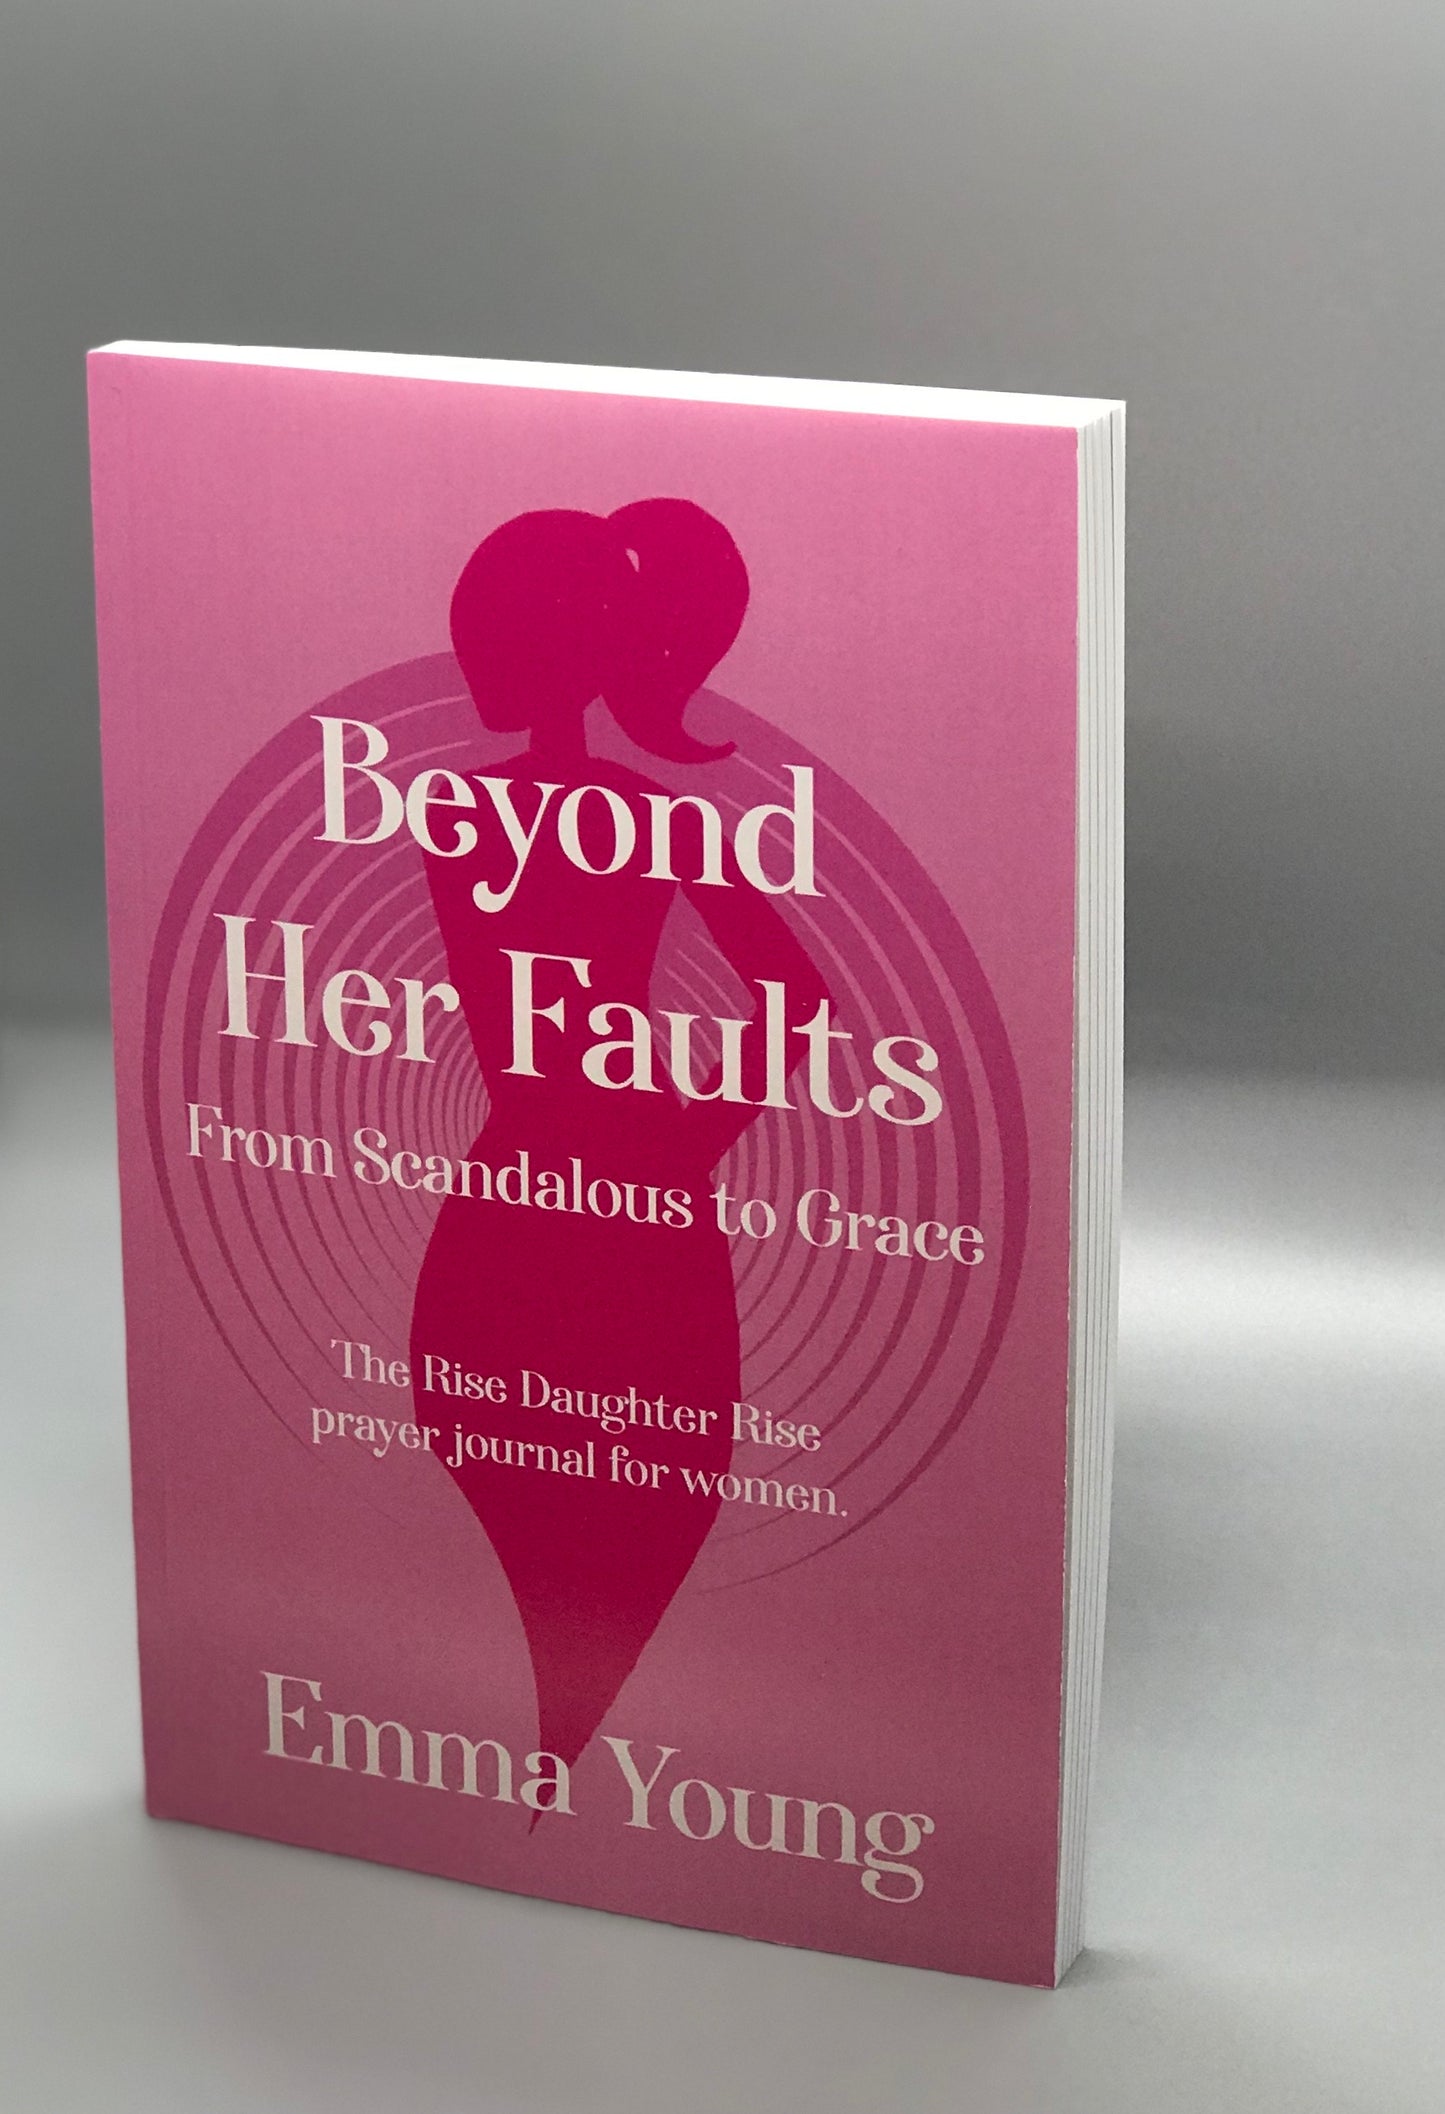 Side view of pink book cover with centered woman's silhouette.